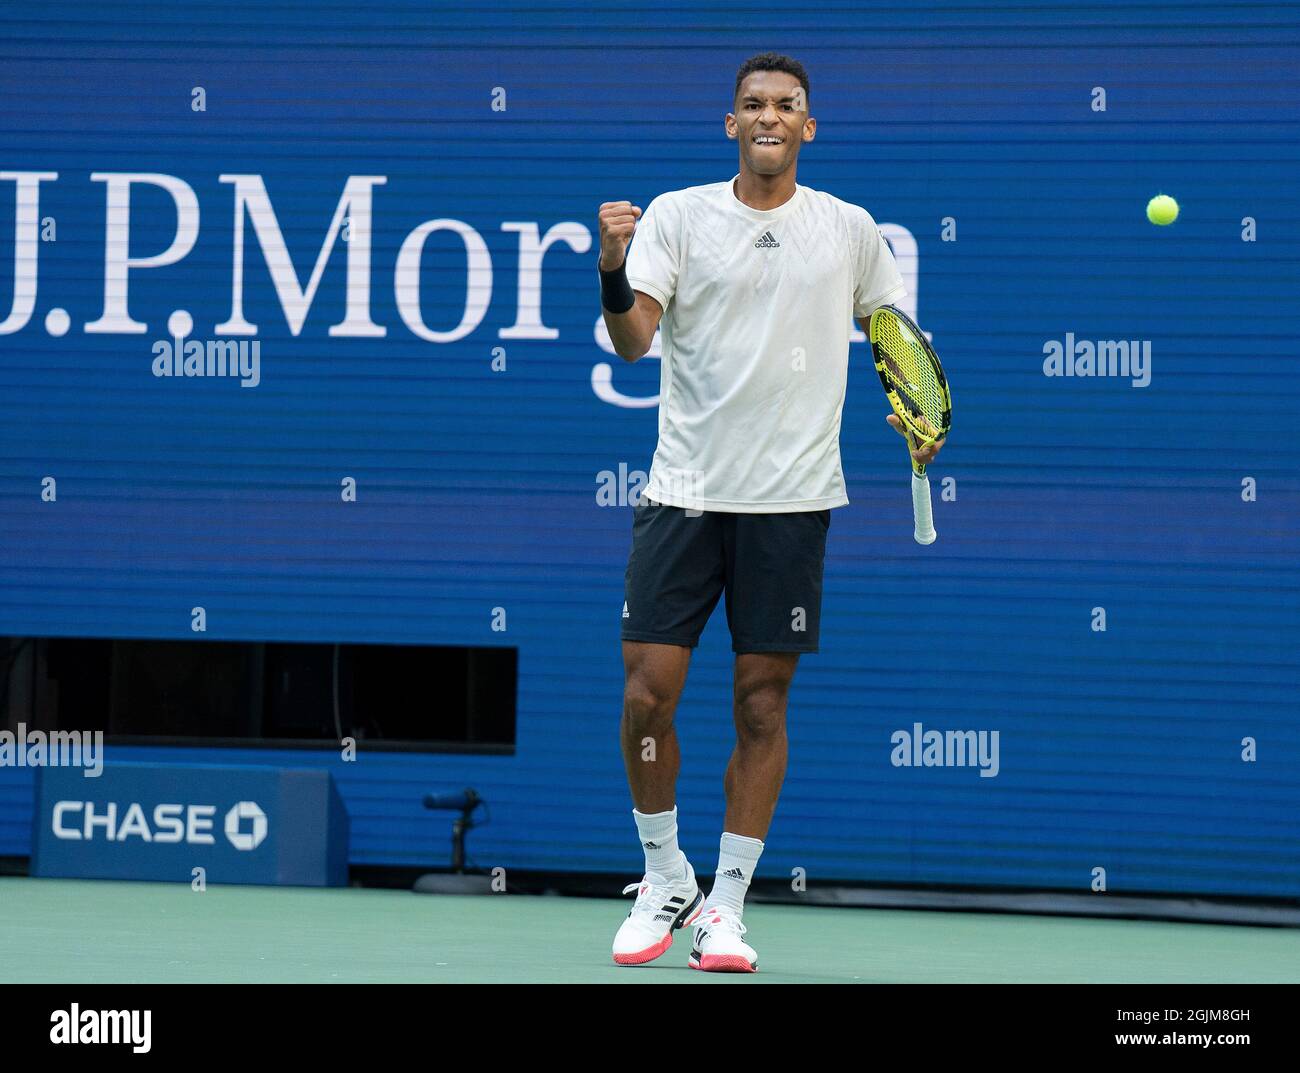 New York, USA, 10 September, 2021 Felix Auger-Aliassime (CAN) reacts to a point during his semifinal match against Felix Auger-Aliassime (CAN) on day 12 at the 2021 US Open